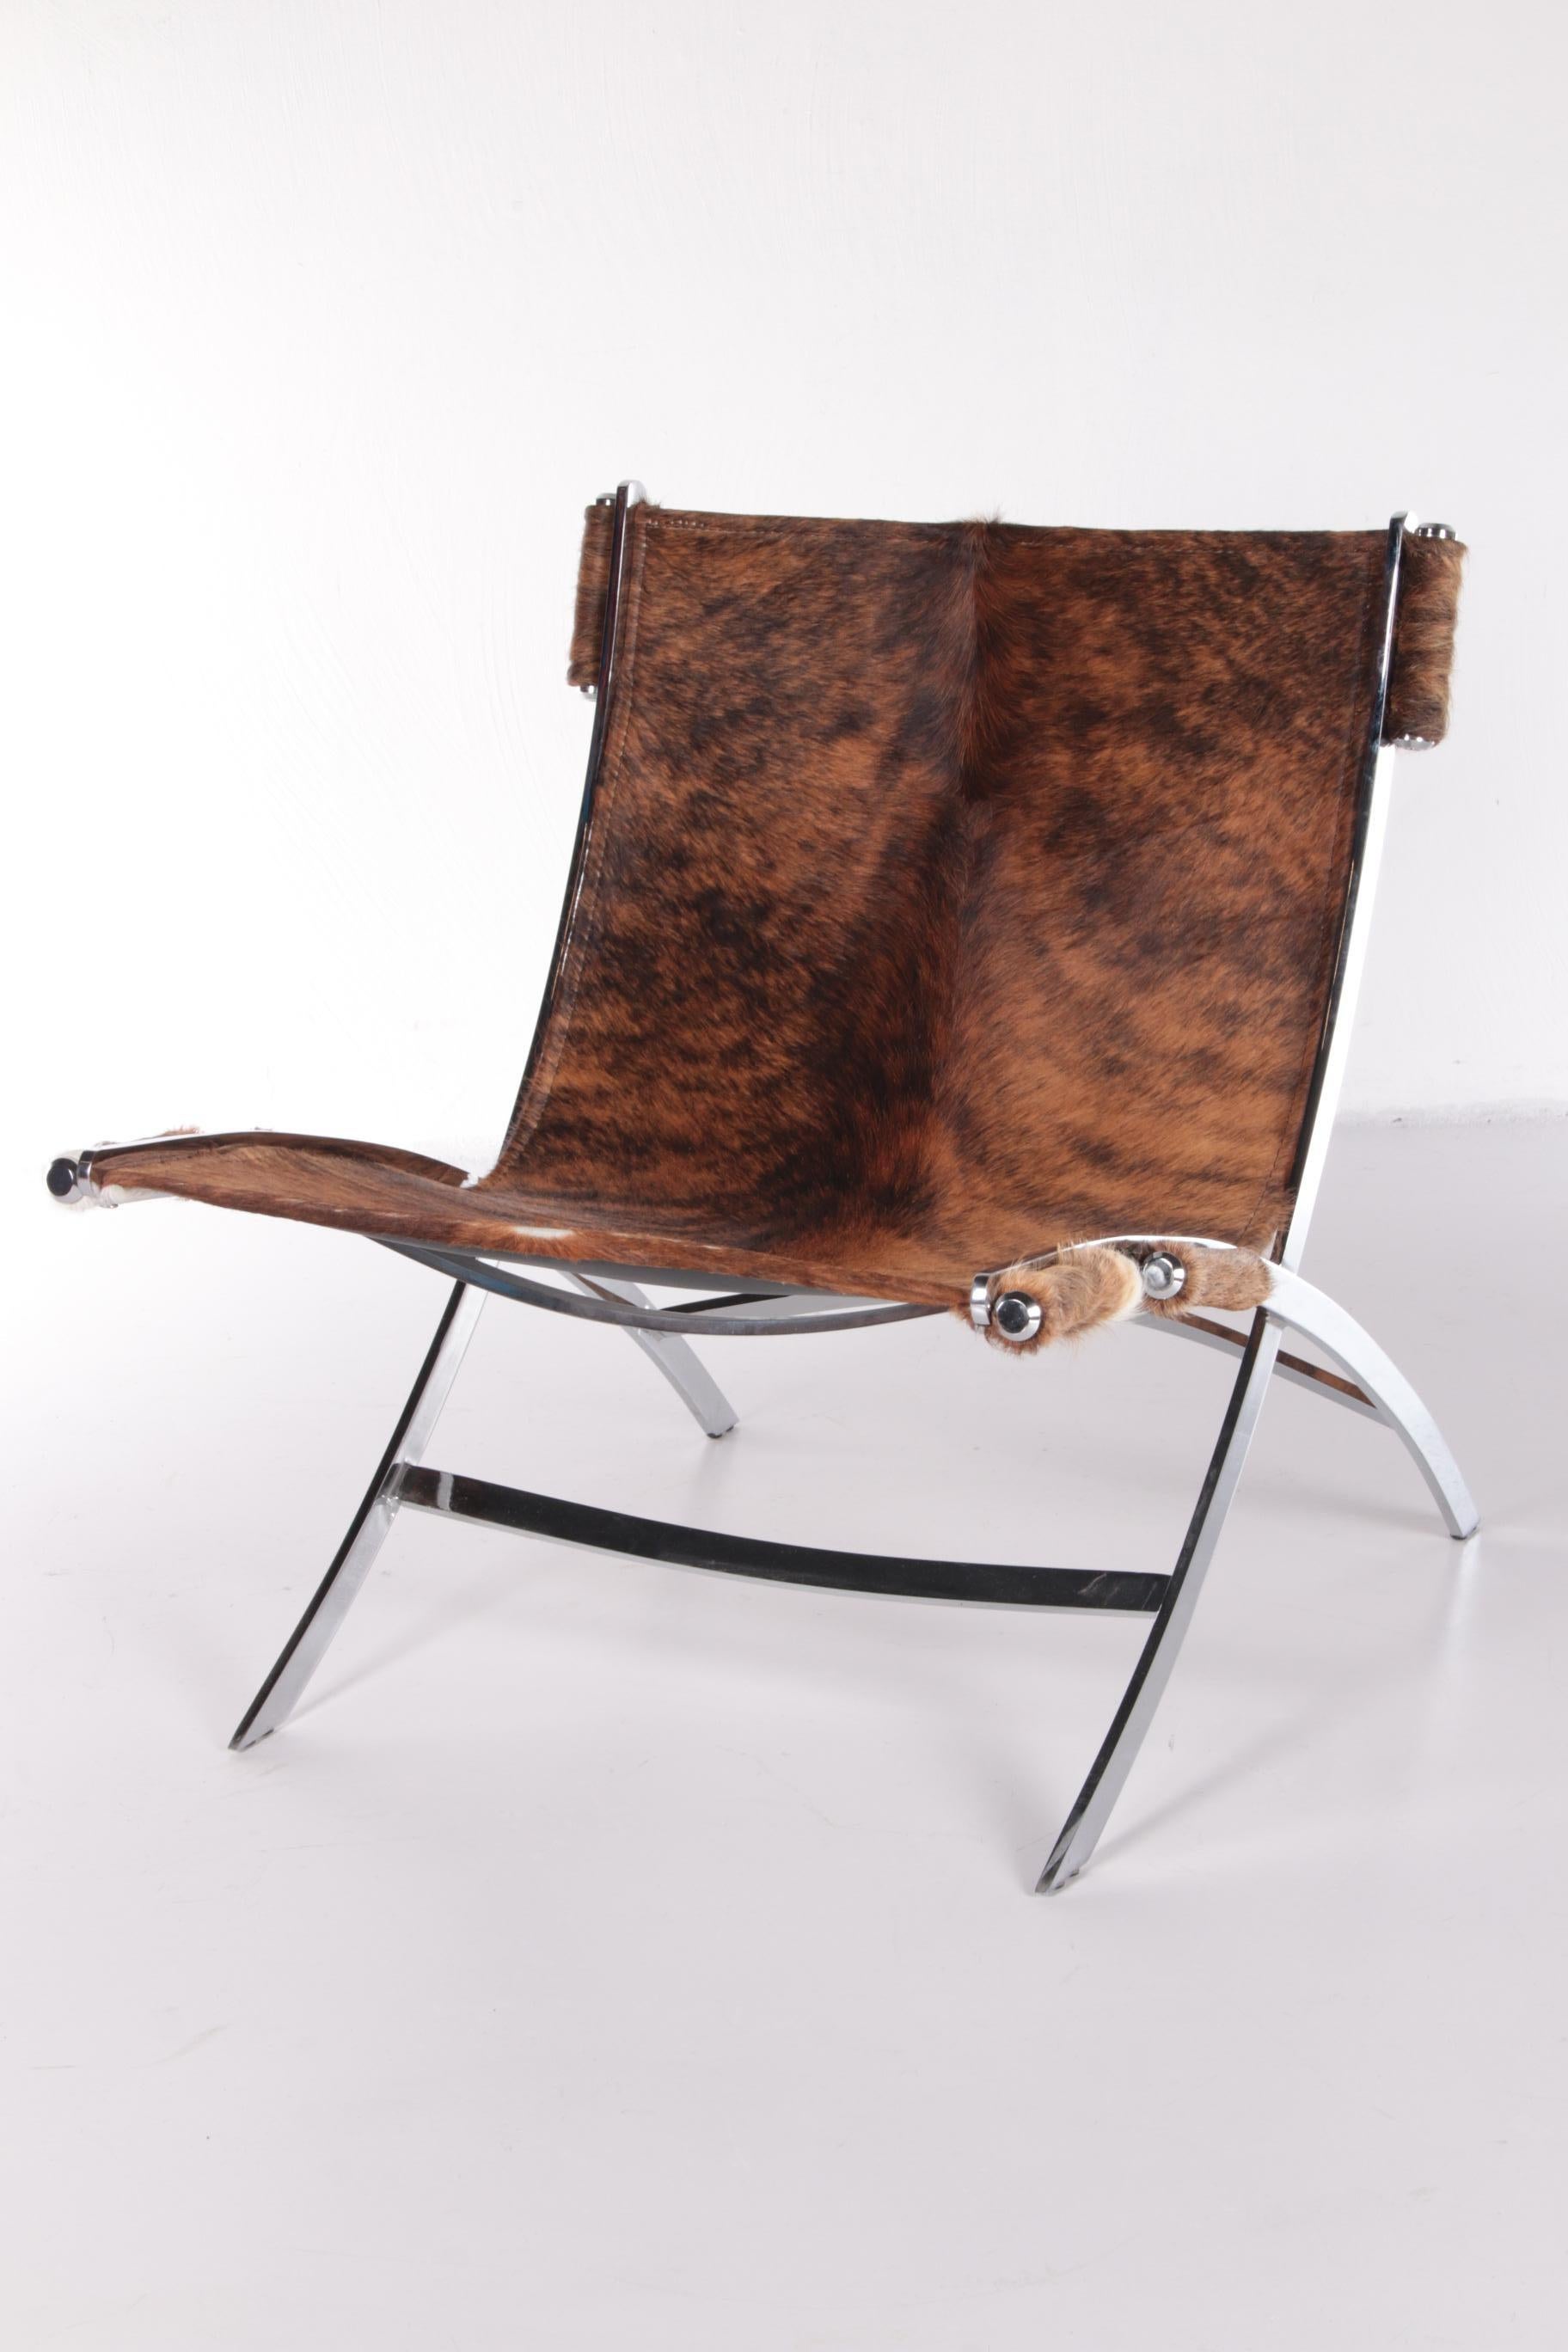 Danish Vintage Lounge Chair with Animal Skin and Heavy Chrome Base